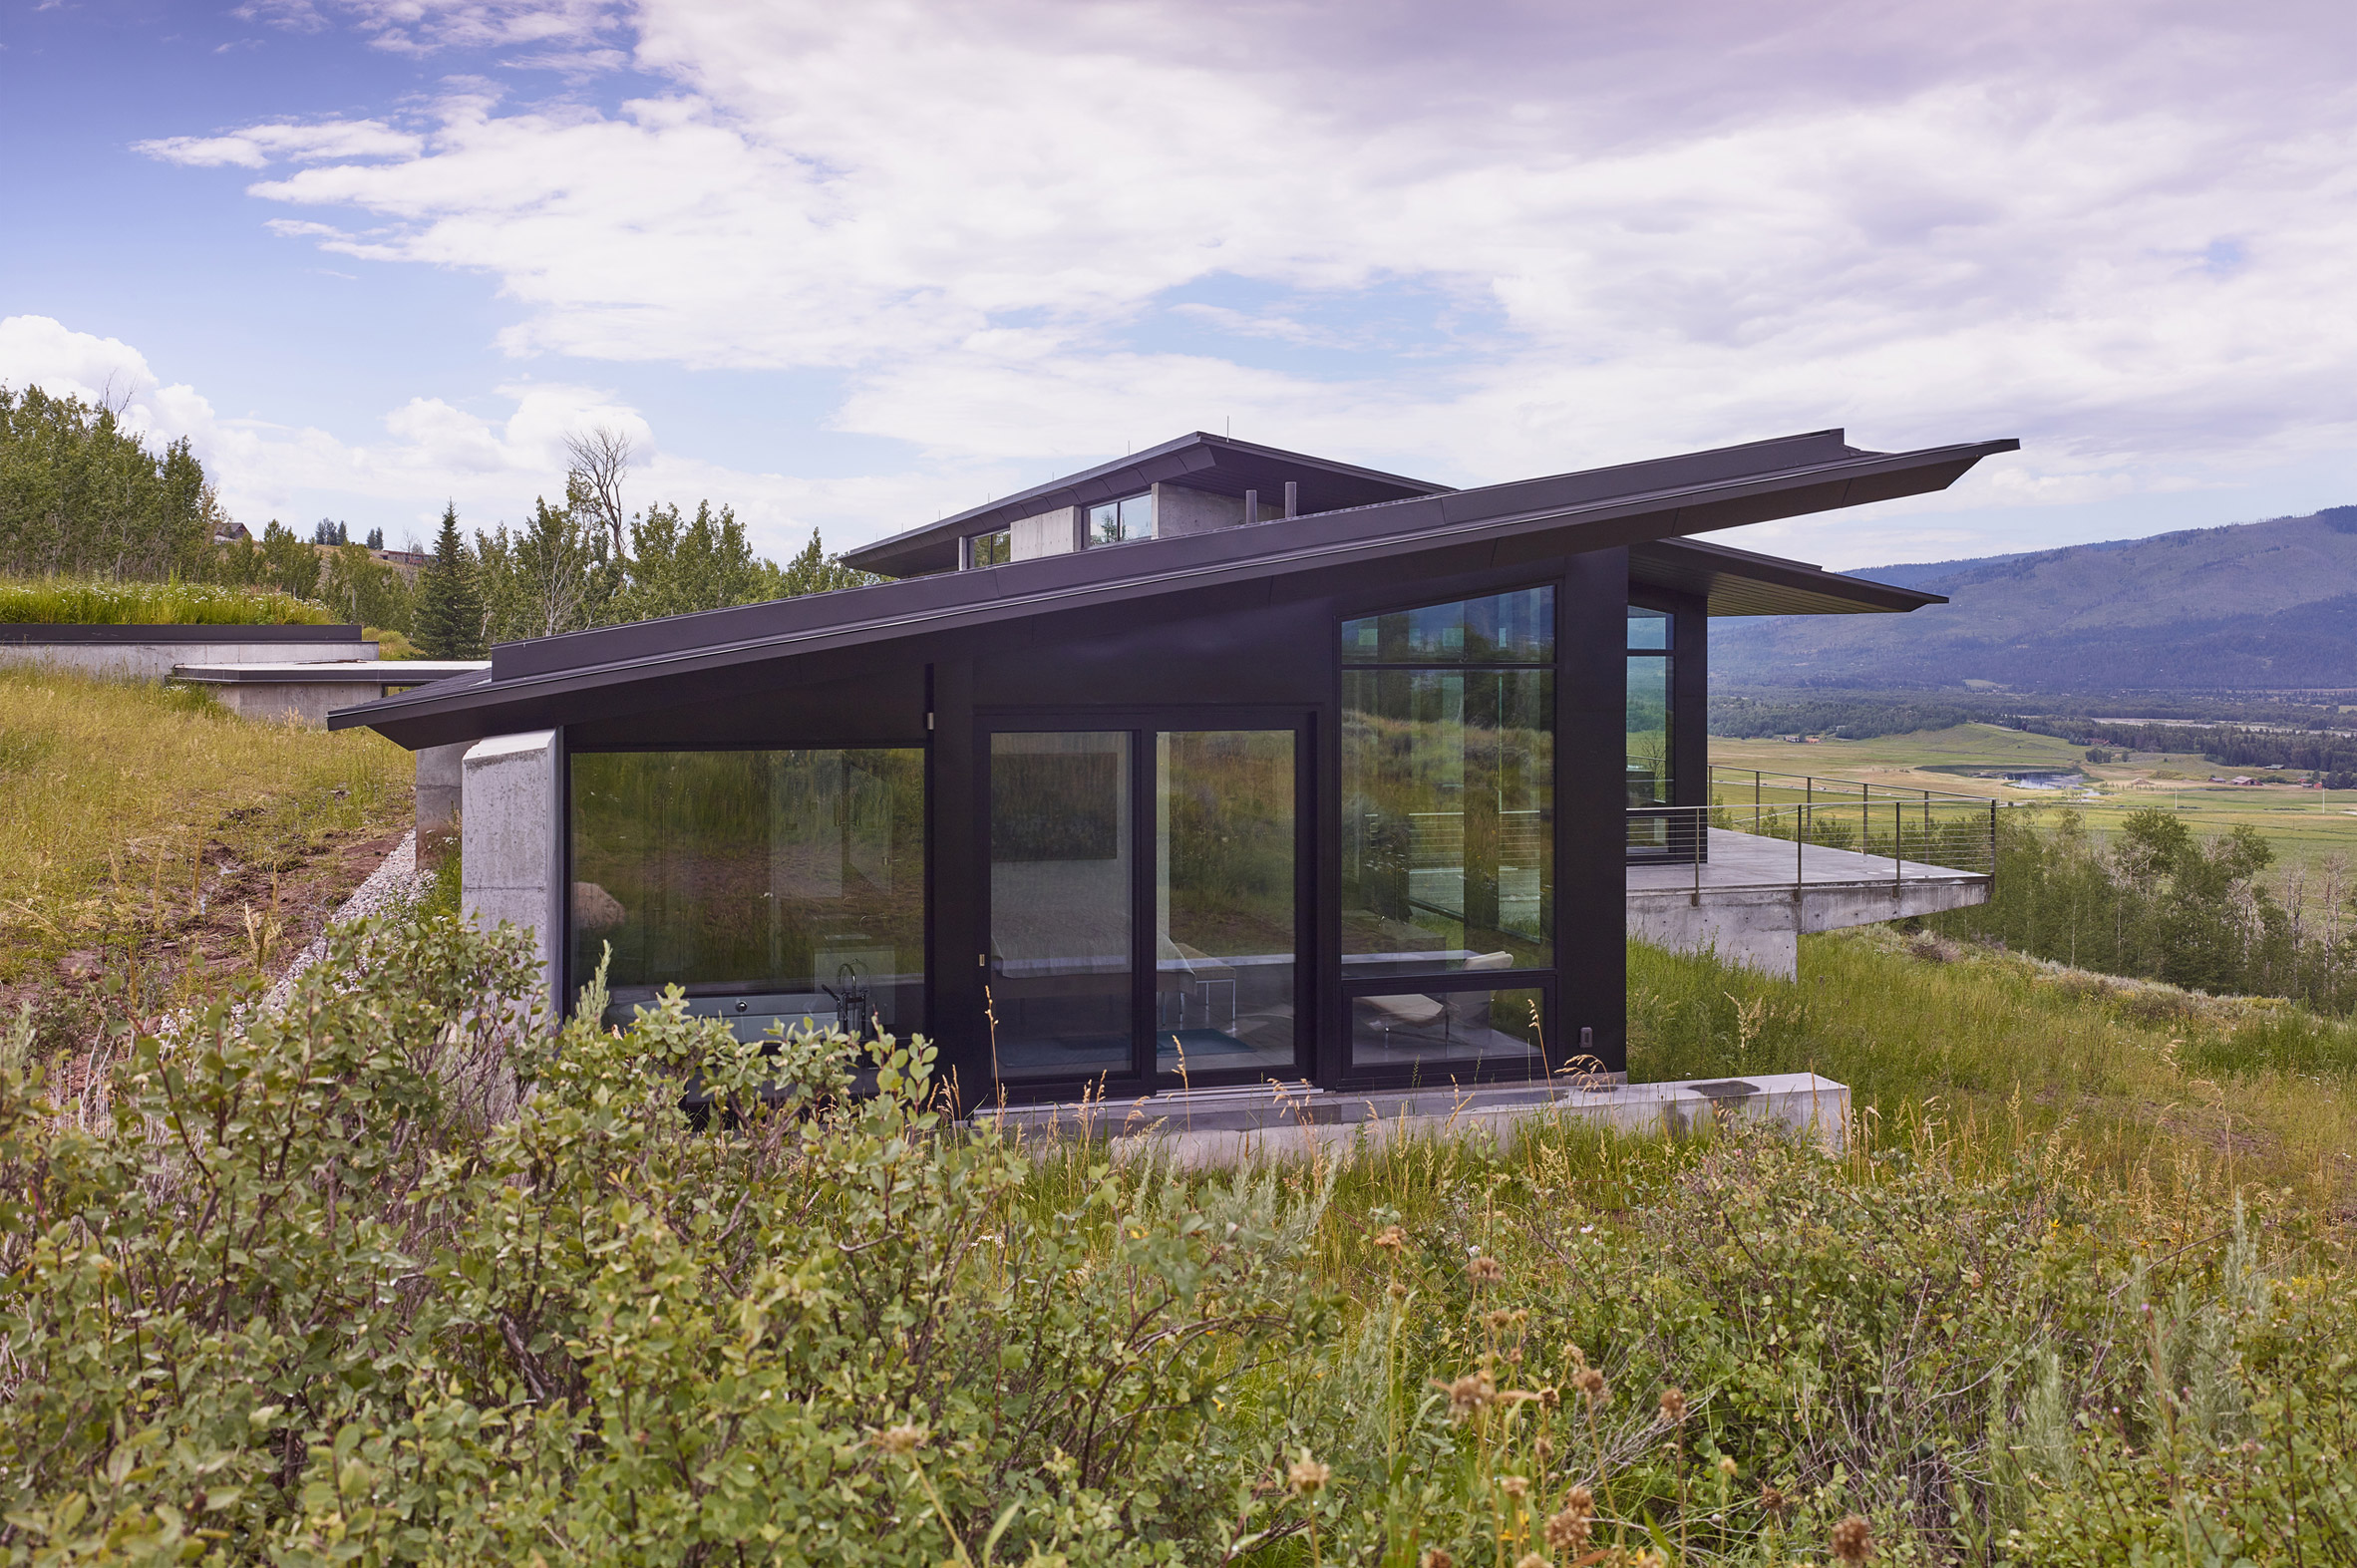 wyoming-residence-abramson-teiger-architects-architecture-residential_dezeen_2364_col_6